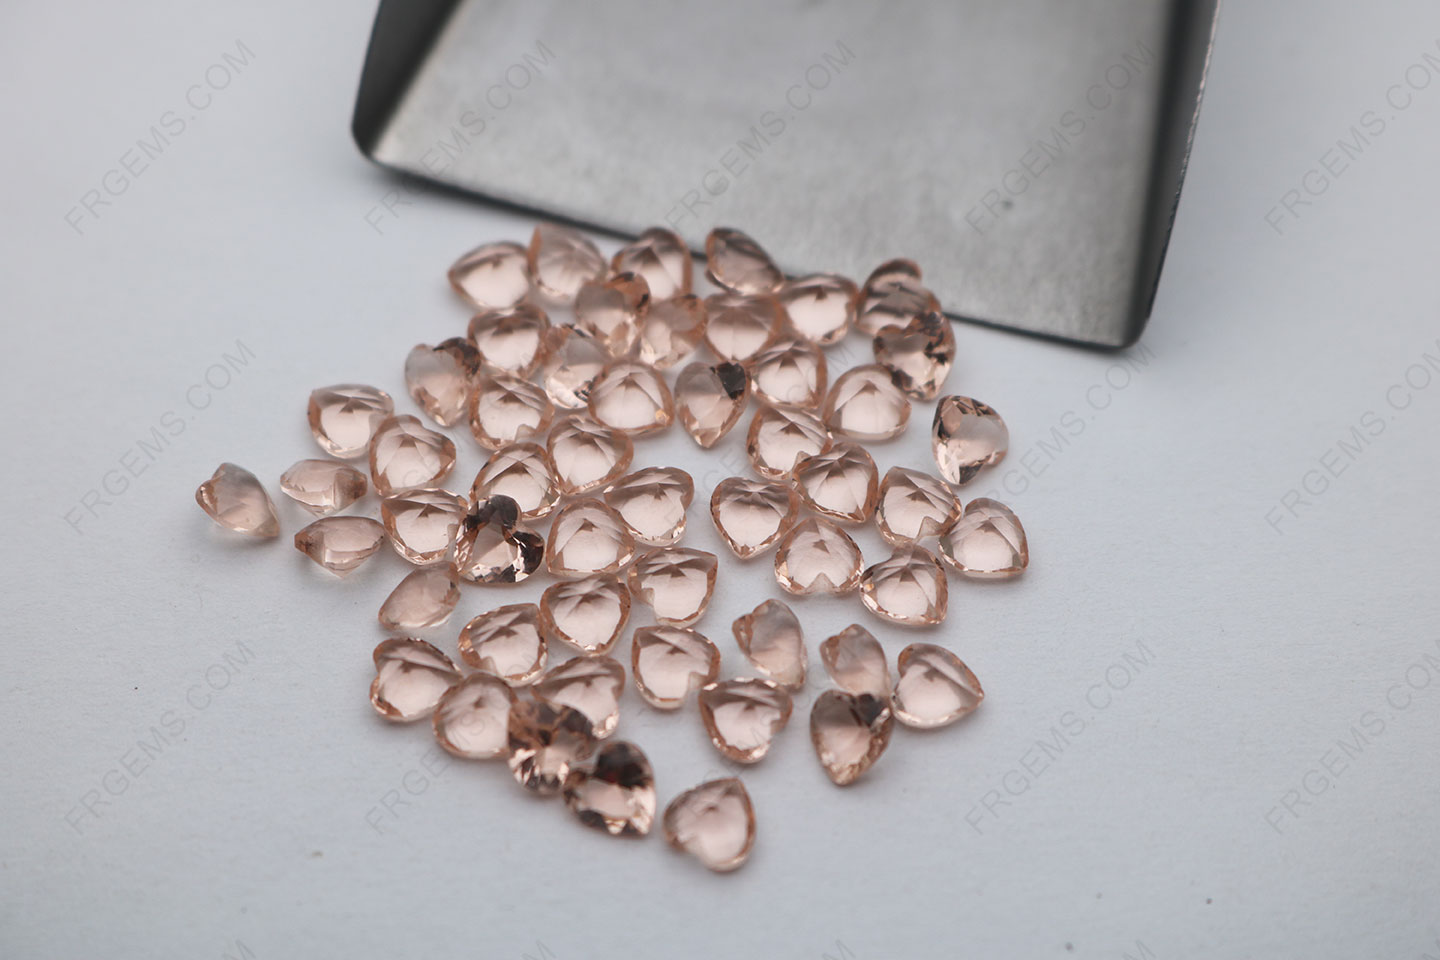 Glass Peach Morganite Champagne color T12 Heart shape Faceted 5x5mm Loose gemstones wholesale from China